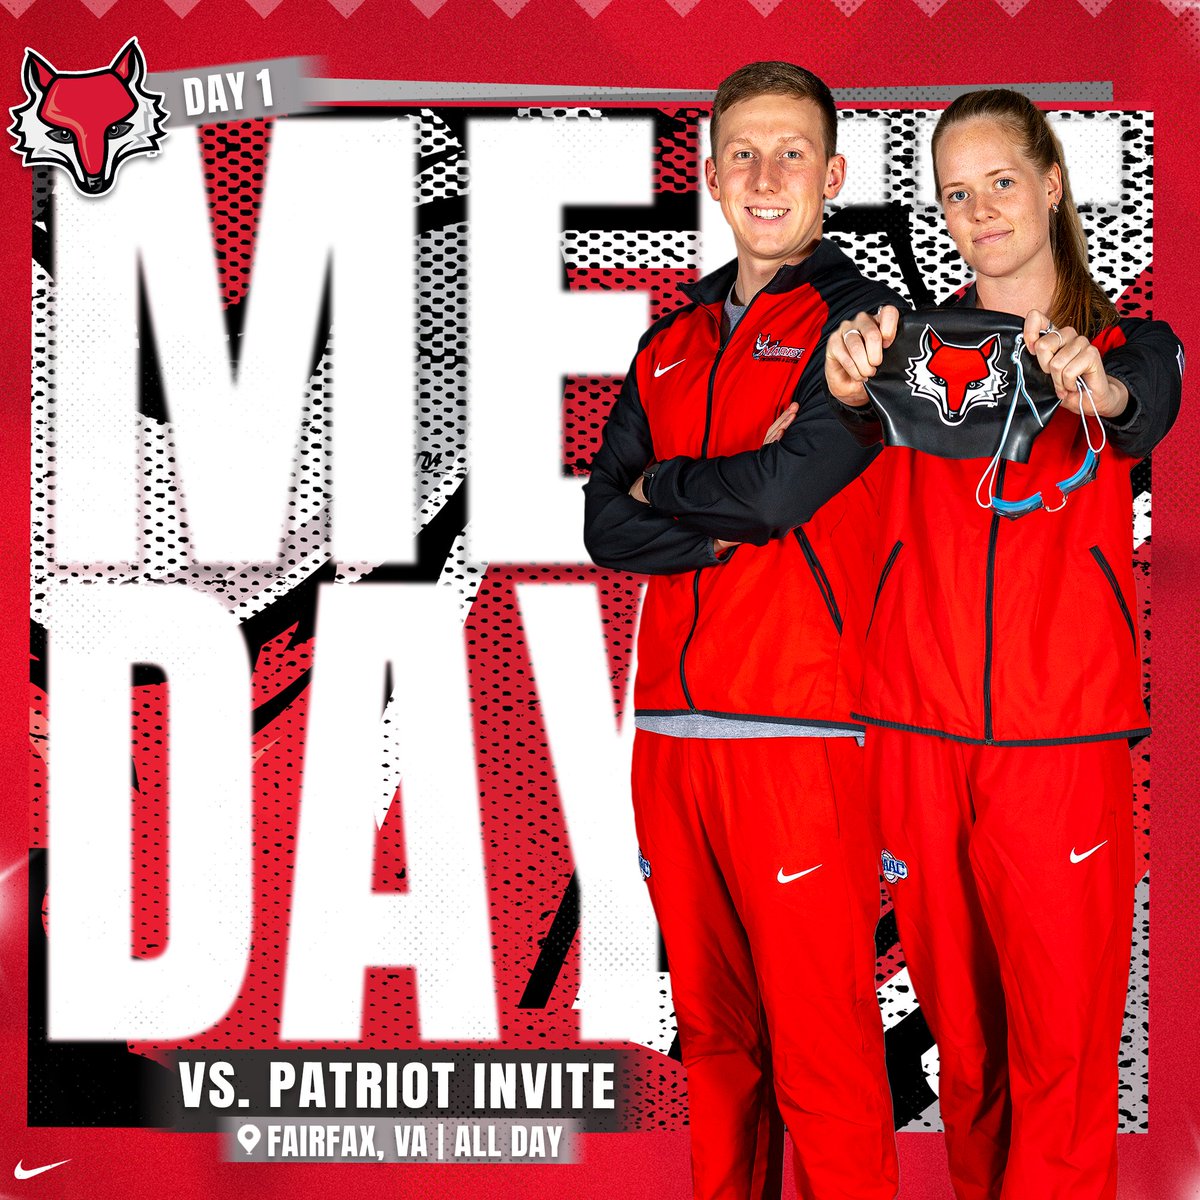 It's Day 1 of Meet Day!! The Red Foxes are on the road in Virginia for a 3-day invite!! 🦊 🆚Patriot Invite | All Day 📍Fairfax, VA